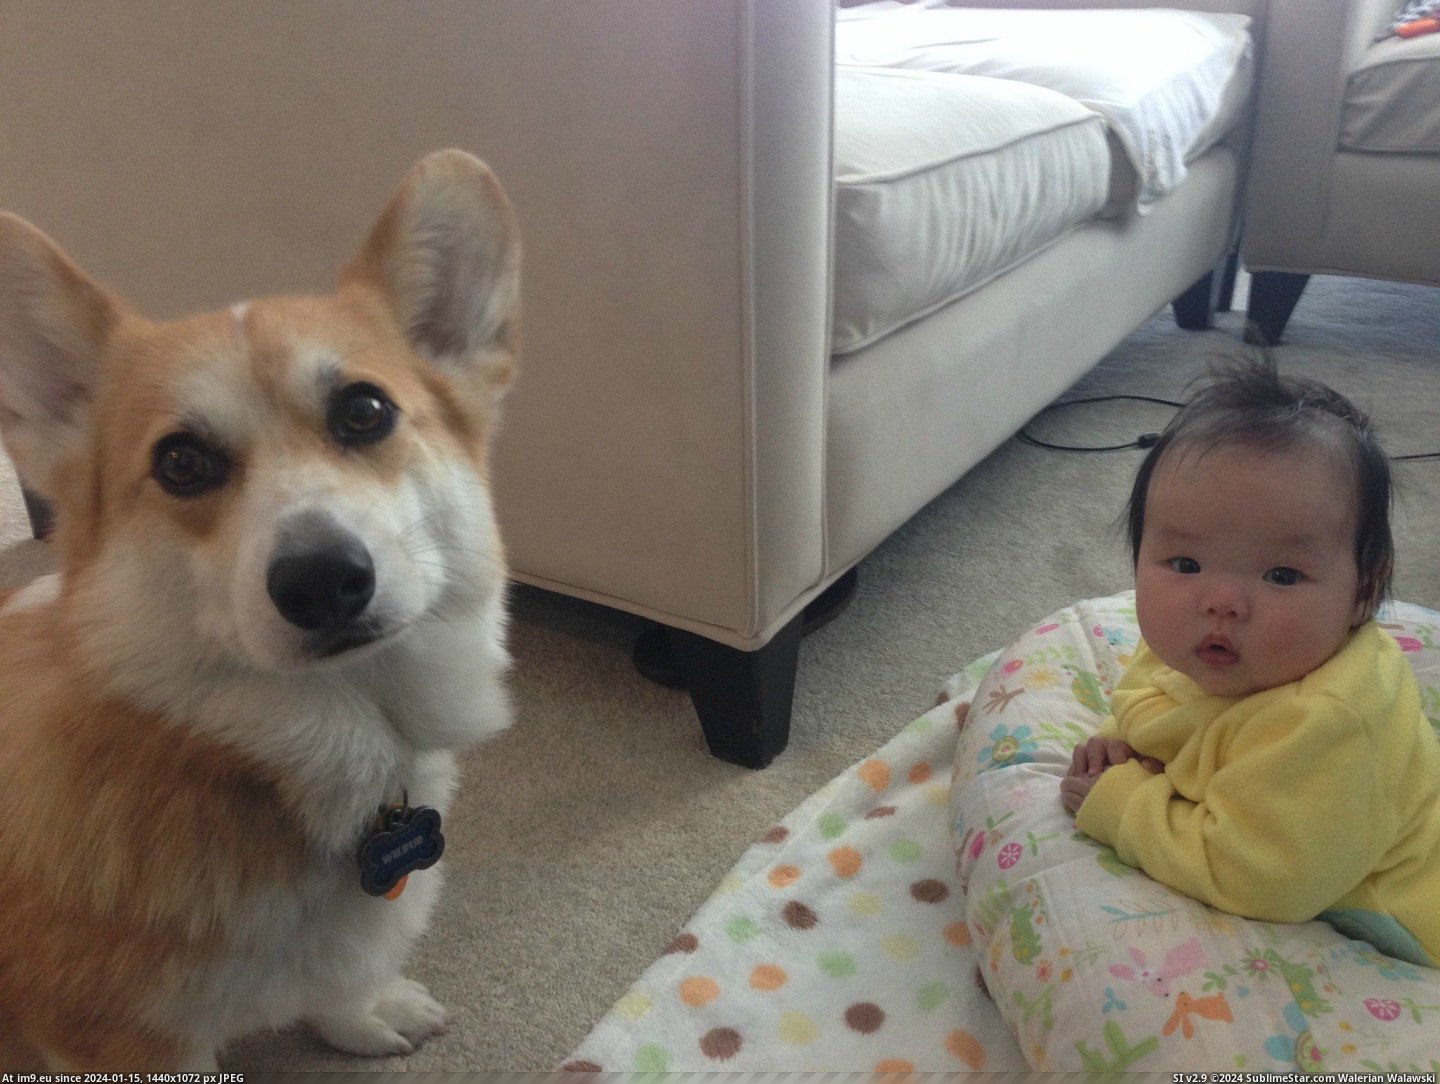 #Old #Likes #Daughter #Depressed #Counseli #Psychiatrist #Month #Corgi #Lie [Aww] My corgi likes to lie down next to my 4 month old daughter. It looks like he's depressed and she's a psychiatrist counseli Pic. (Image of album My r/AWW favs))